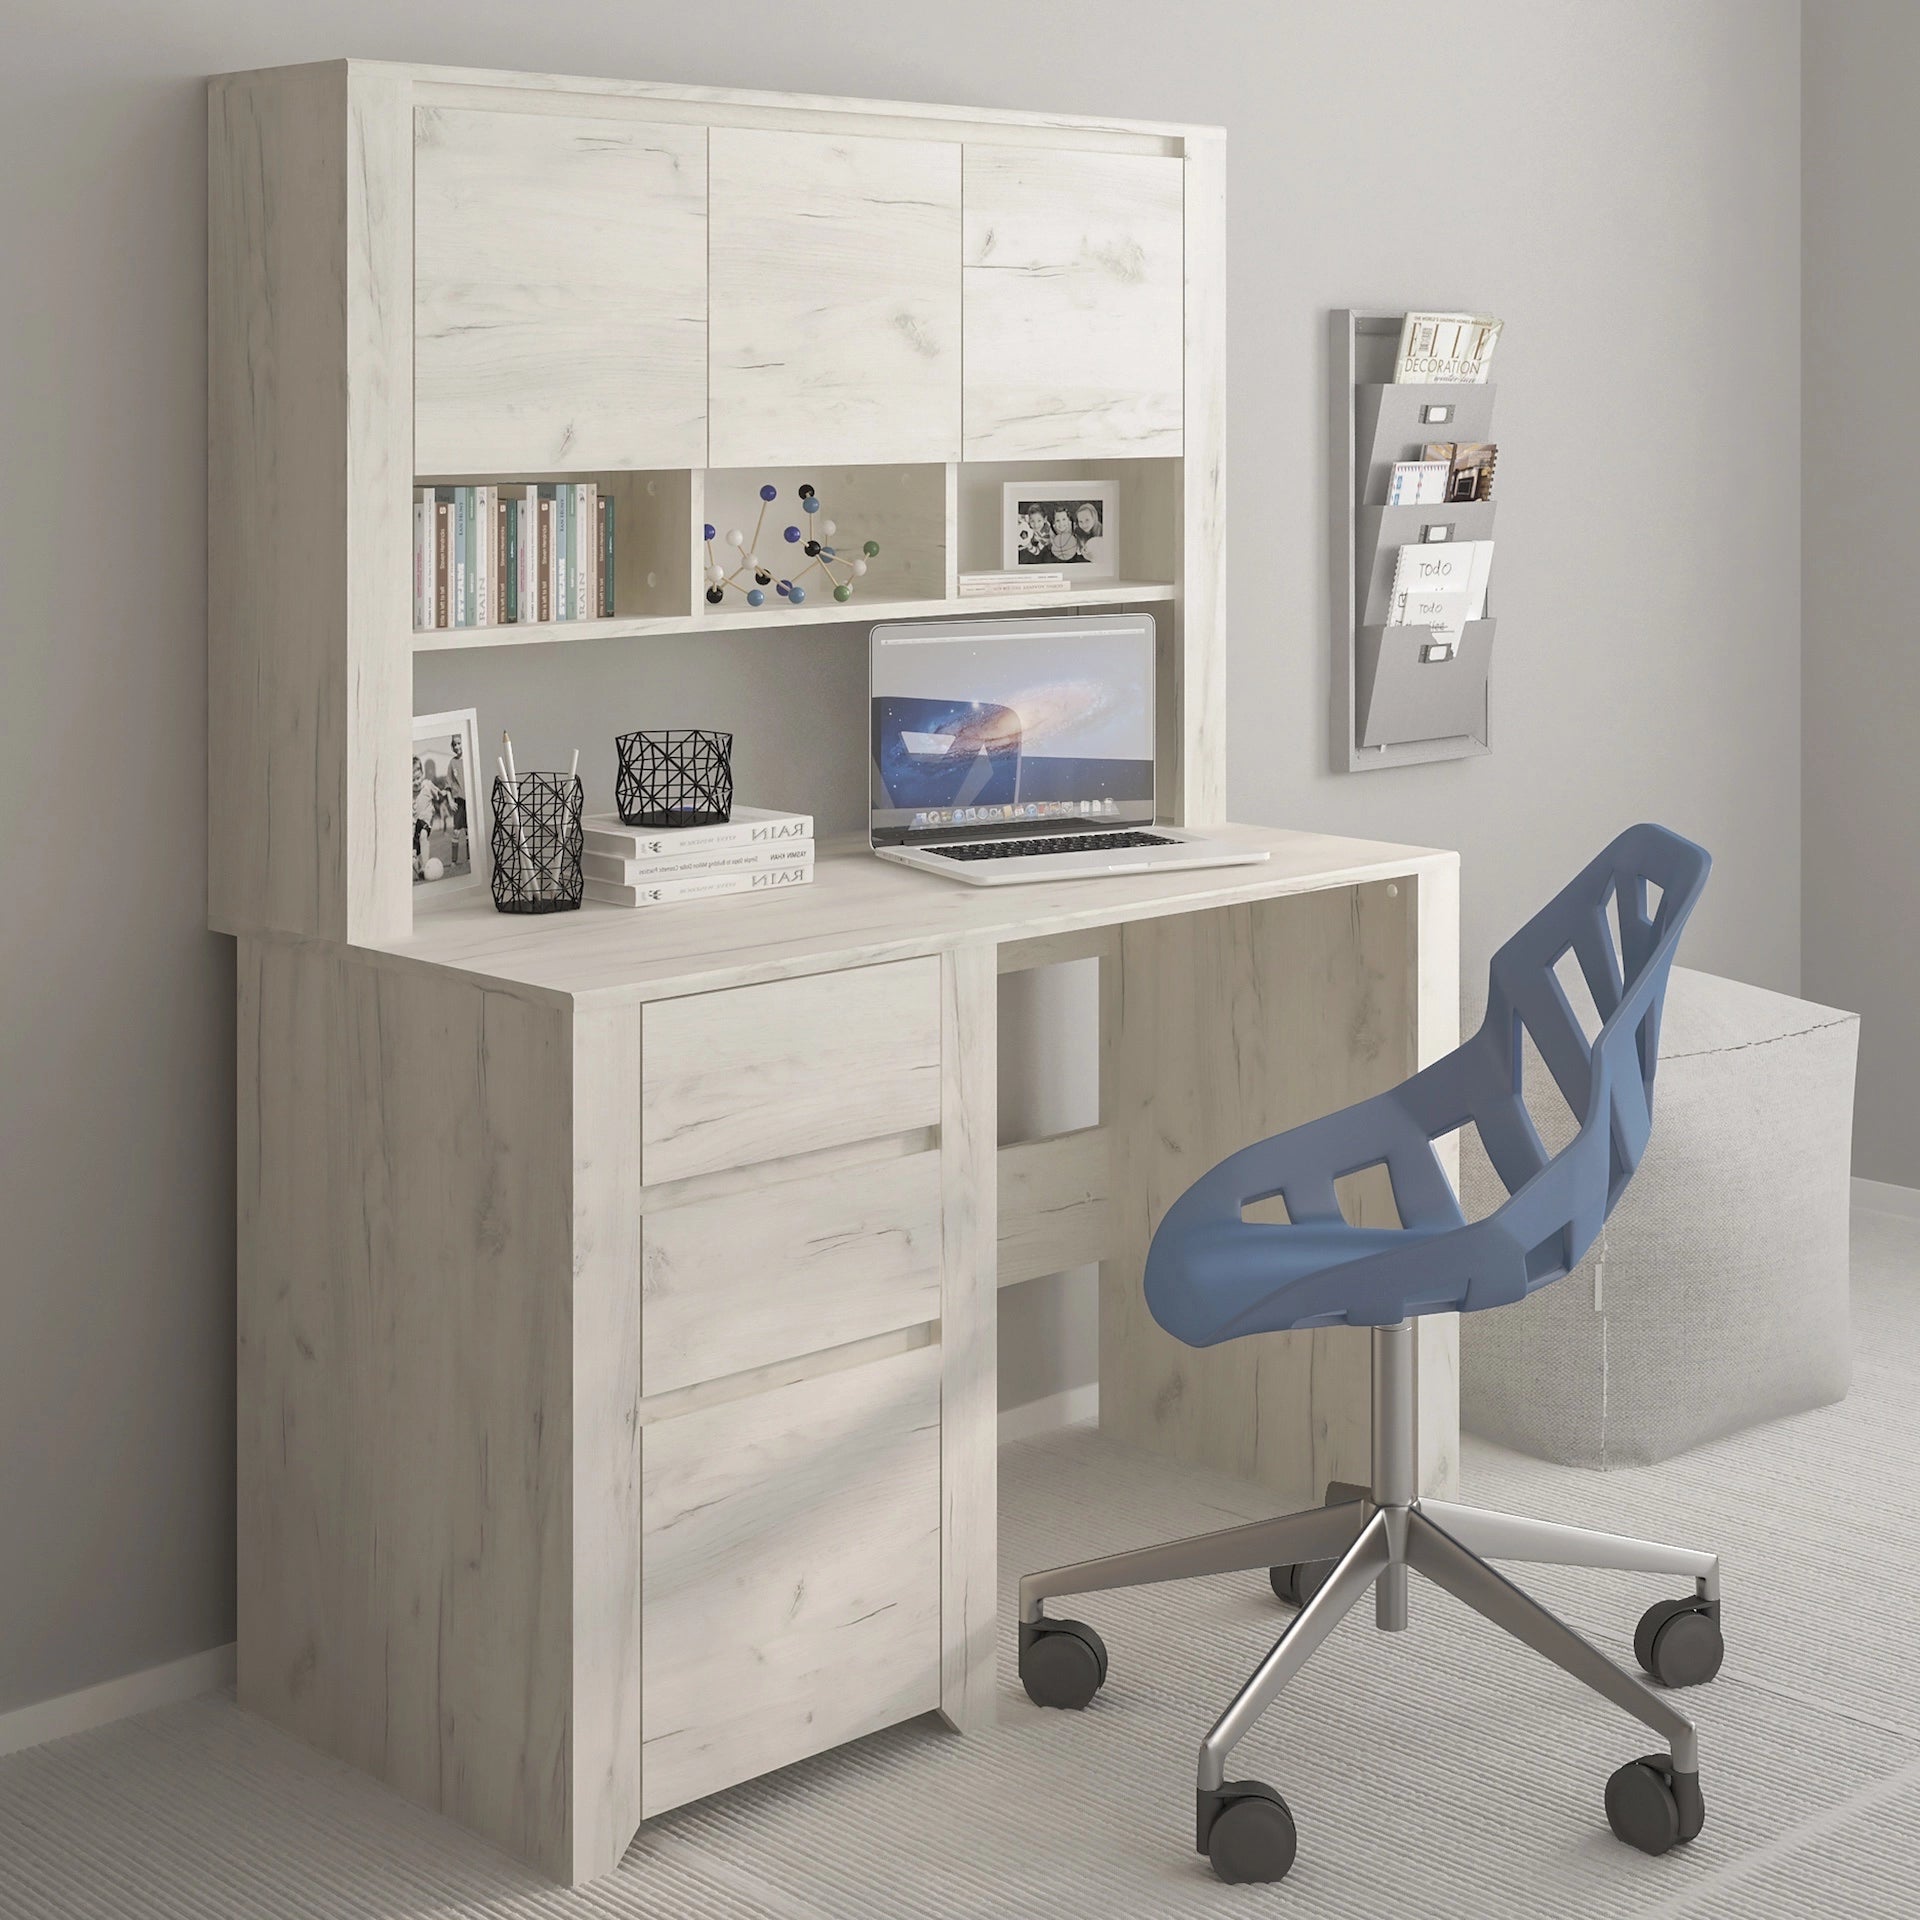 Furniture To Go Angel Top Unit For Desk in White Craft Oak